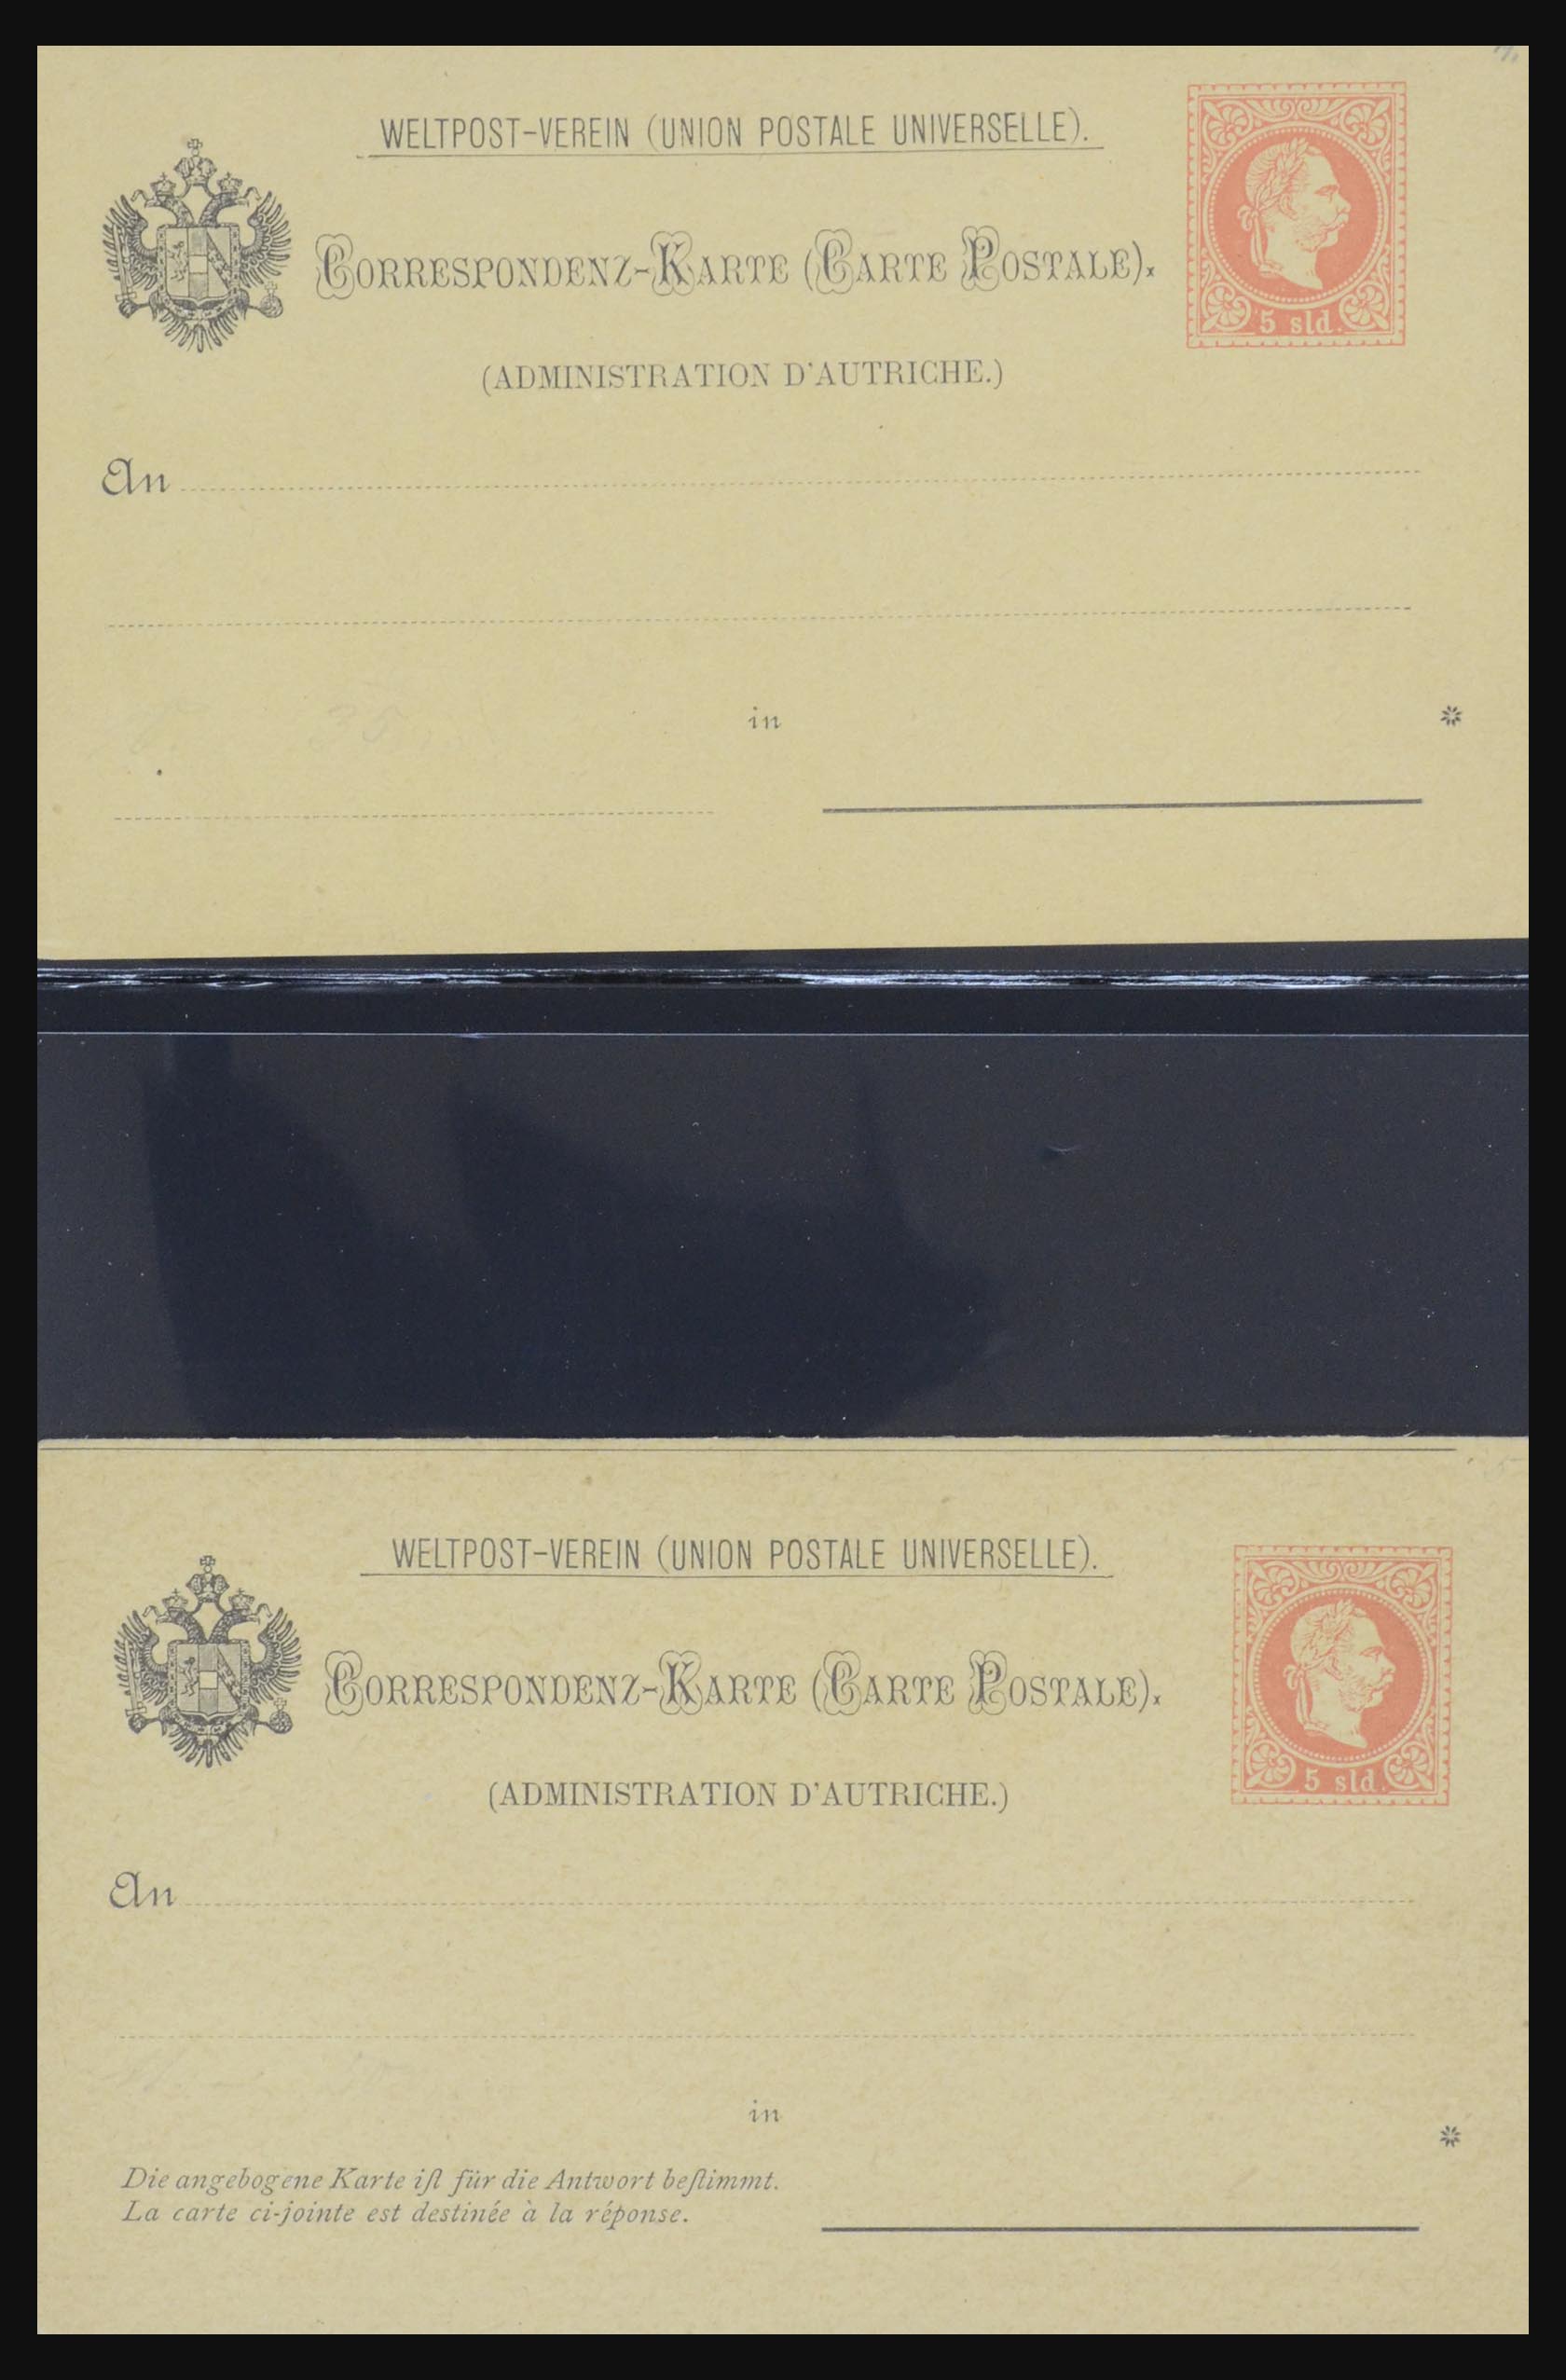 32254 0028 - 32254 Austria covers from 1800.